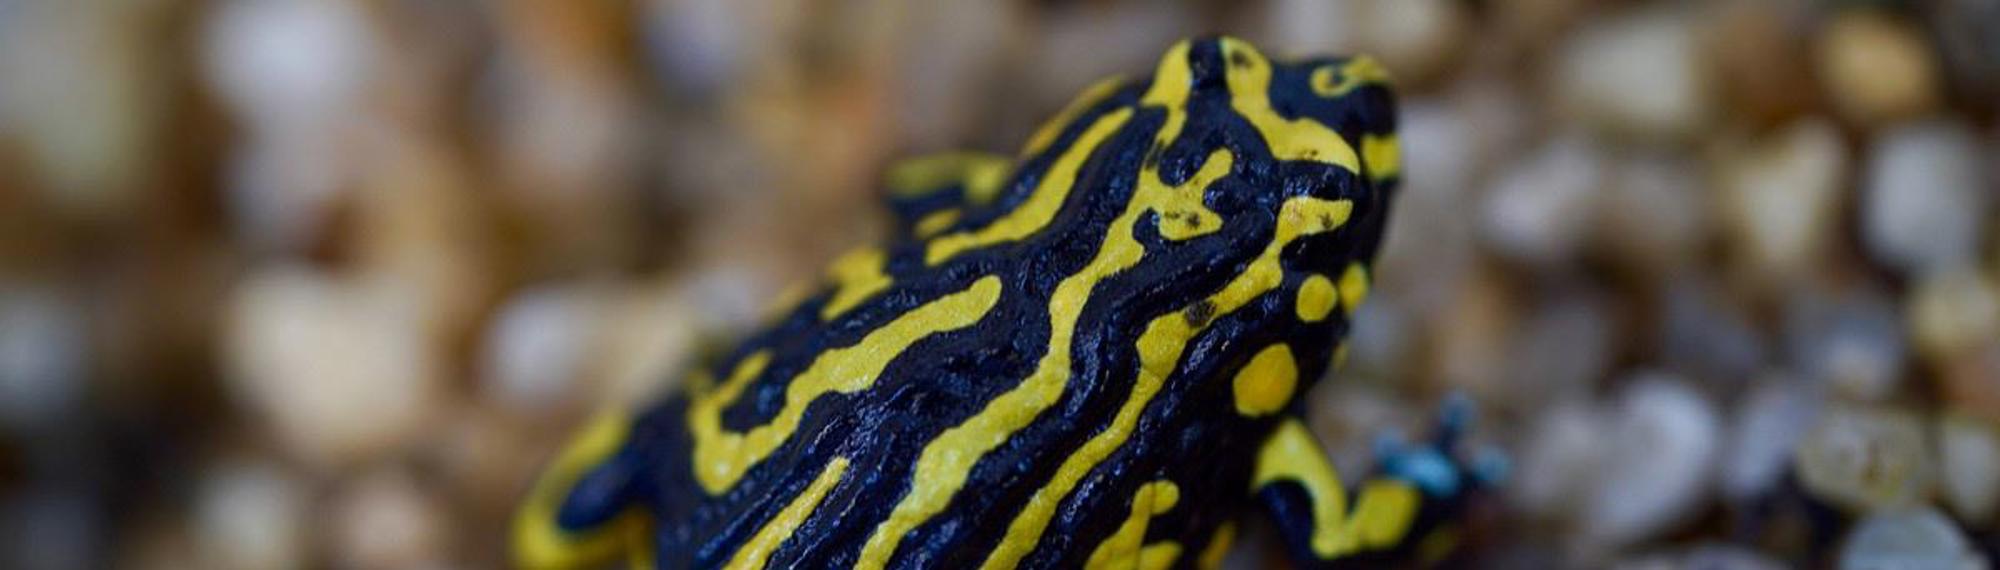 Northern Corroboree Frog with vivid yellow and black stripes sitting on wet pebbles.